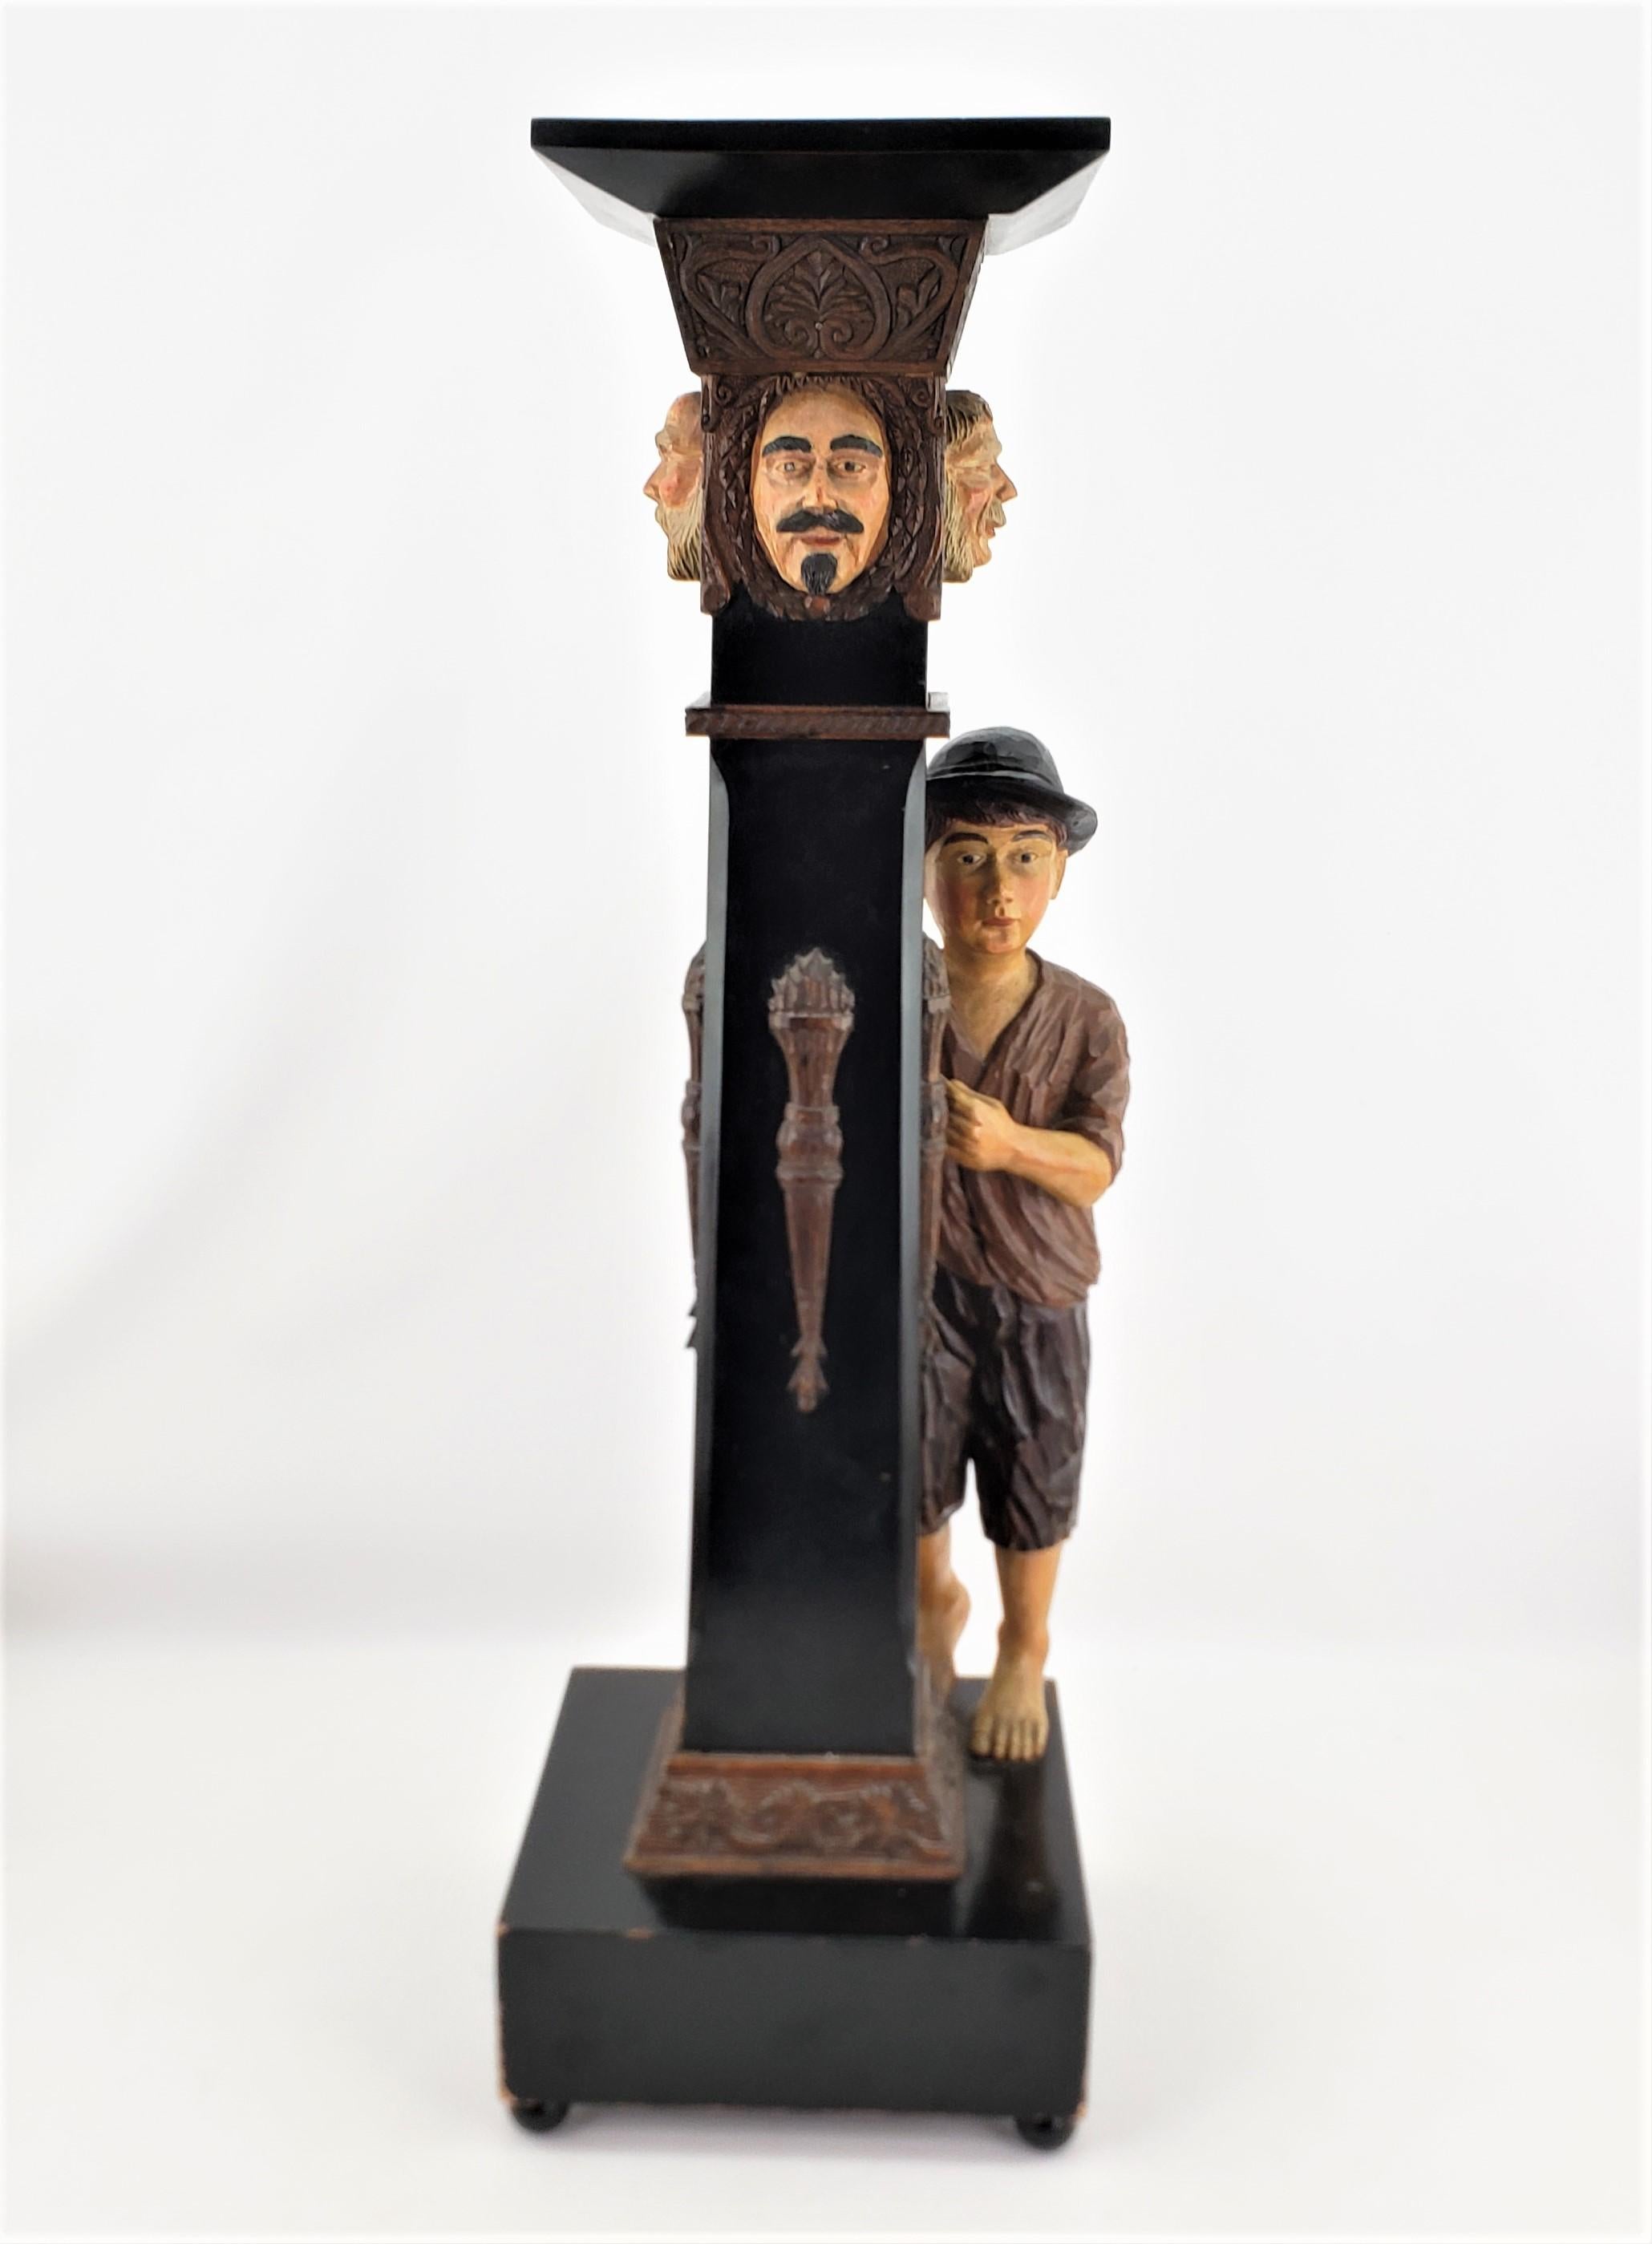 Austrian Antique Swiss or German Black Forest Styled Hand-Carved & Painted Pedestal For Sale